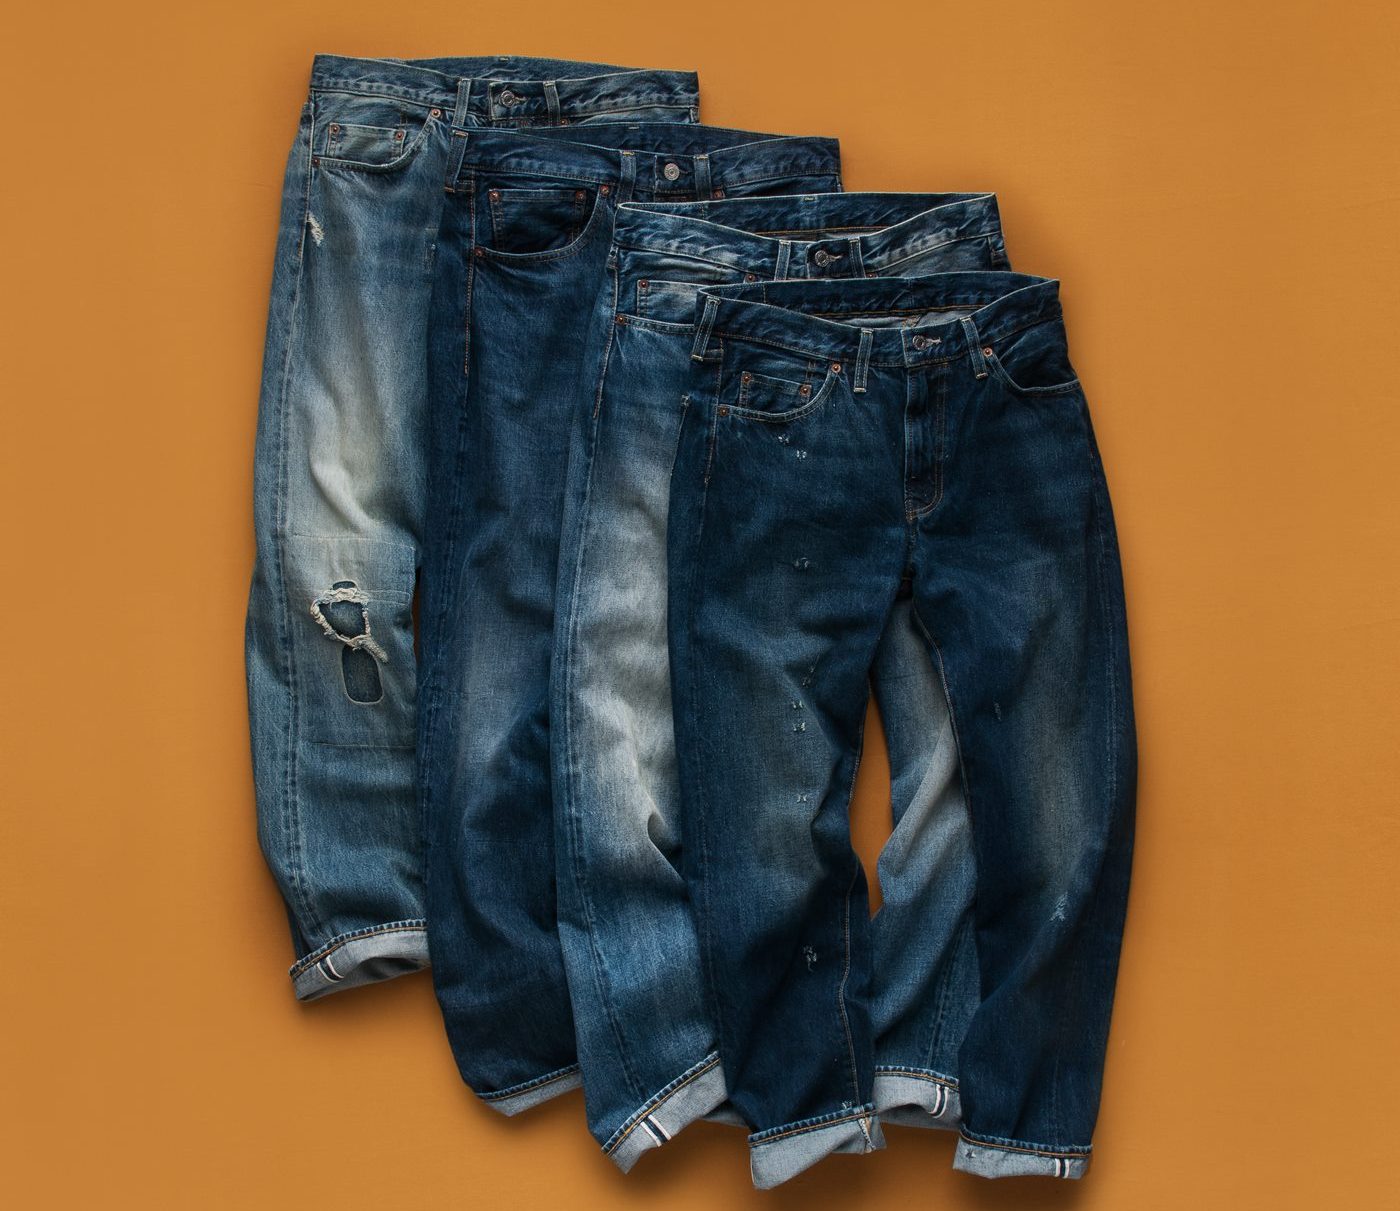 Levi’s Jeans: Save 30% sitewide plus free shipping